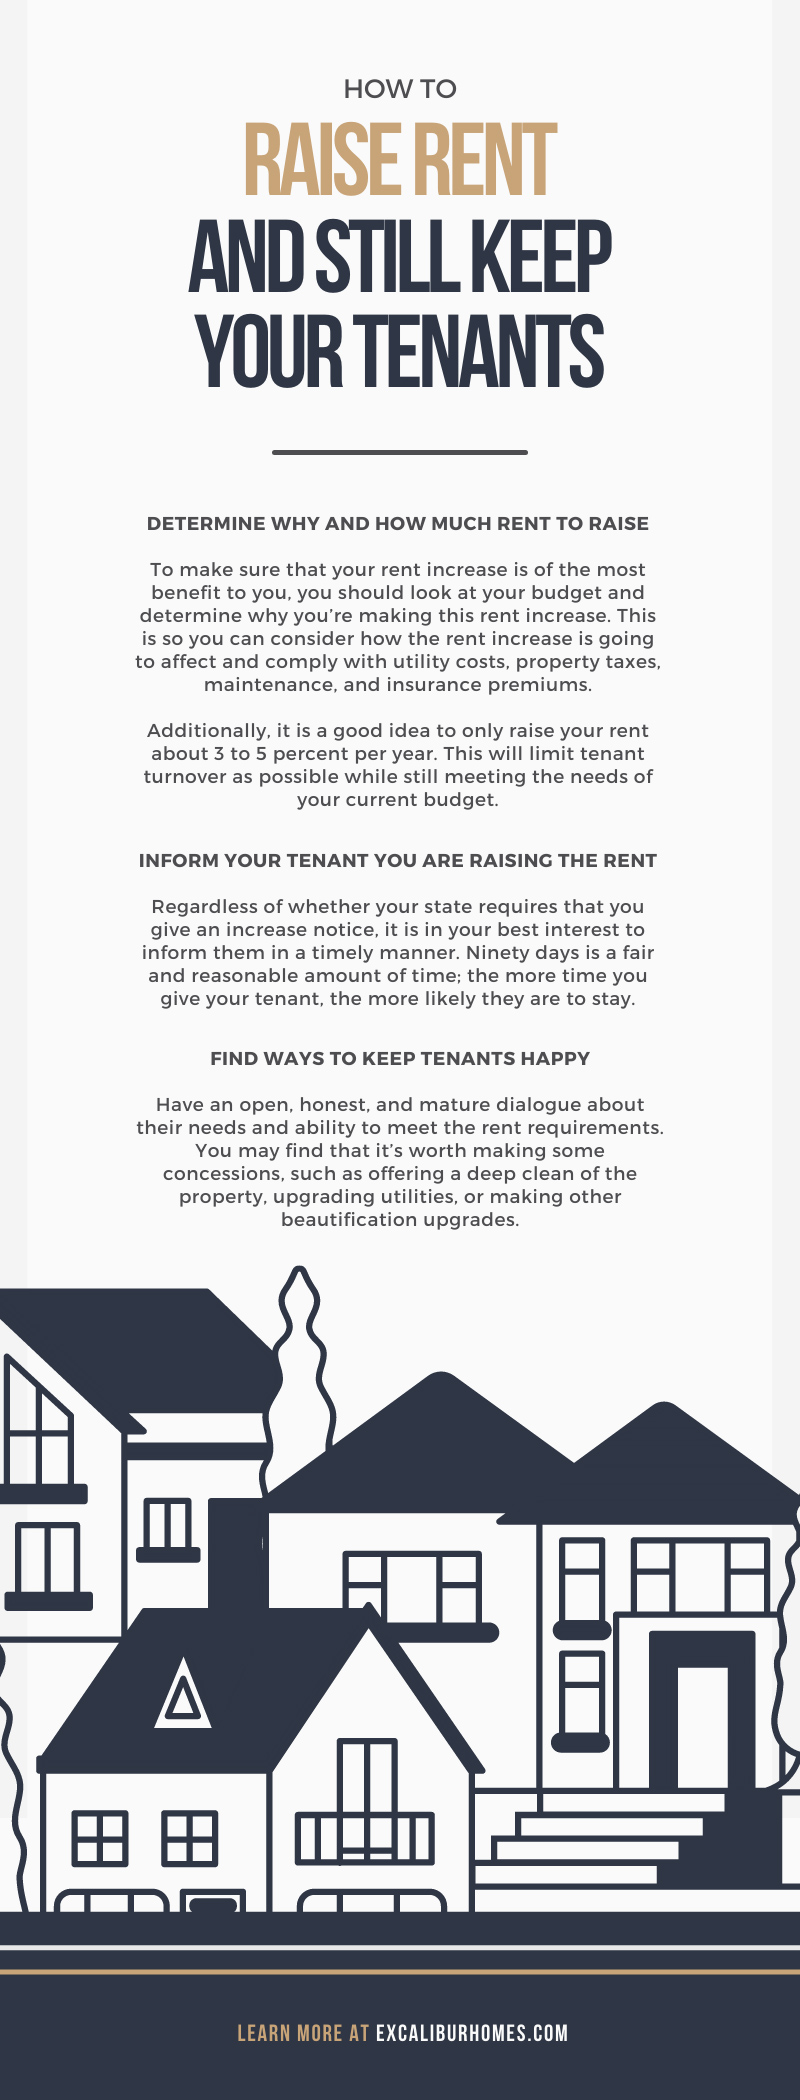 How To Raise Rent and Still Keep Your Tenants